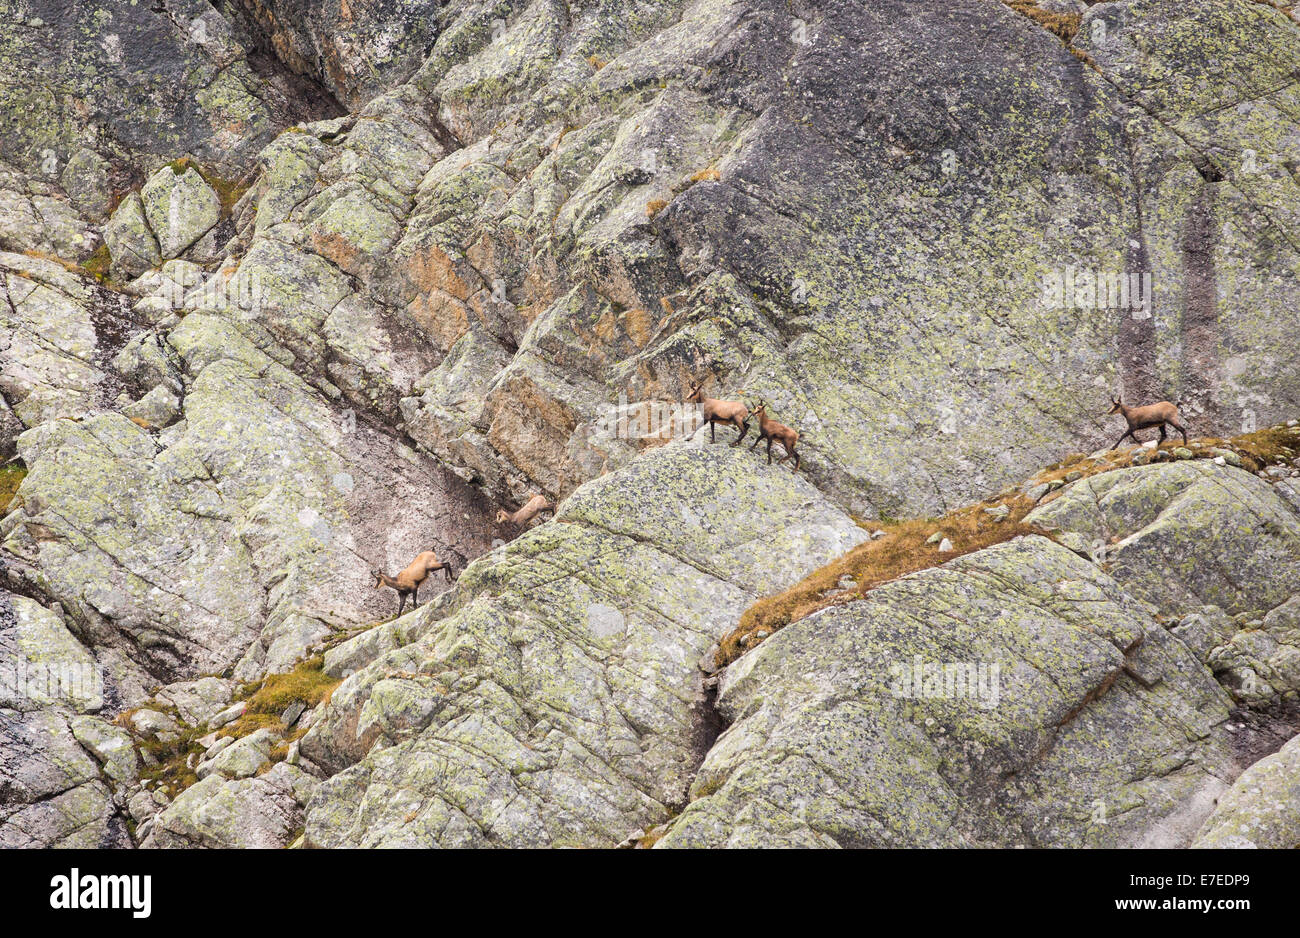 Chamois, Rupicapra rupicapra, on a rock face near Cabanne D'Orny in the Swiss Alps. Stock Photo